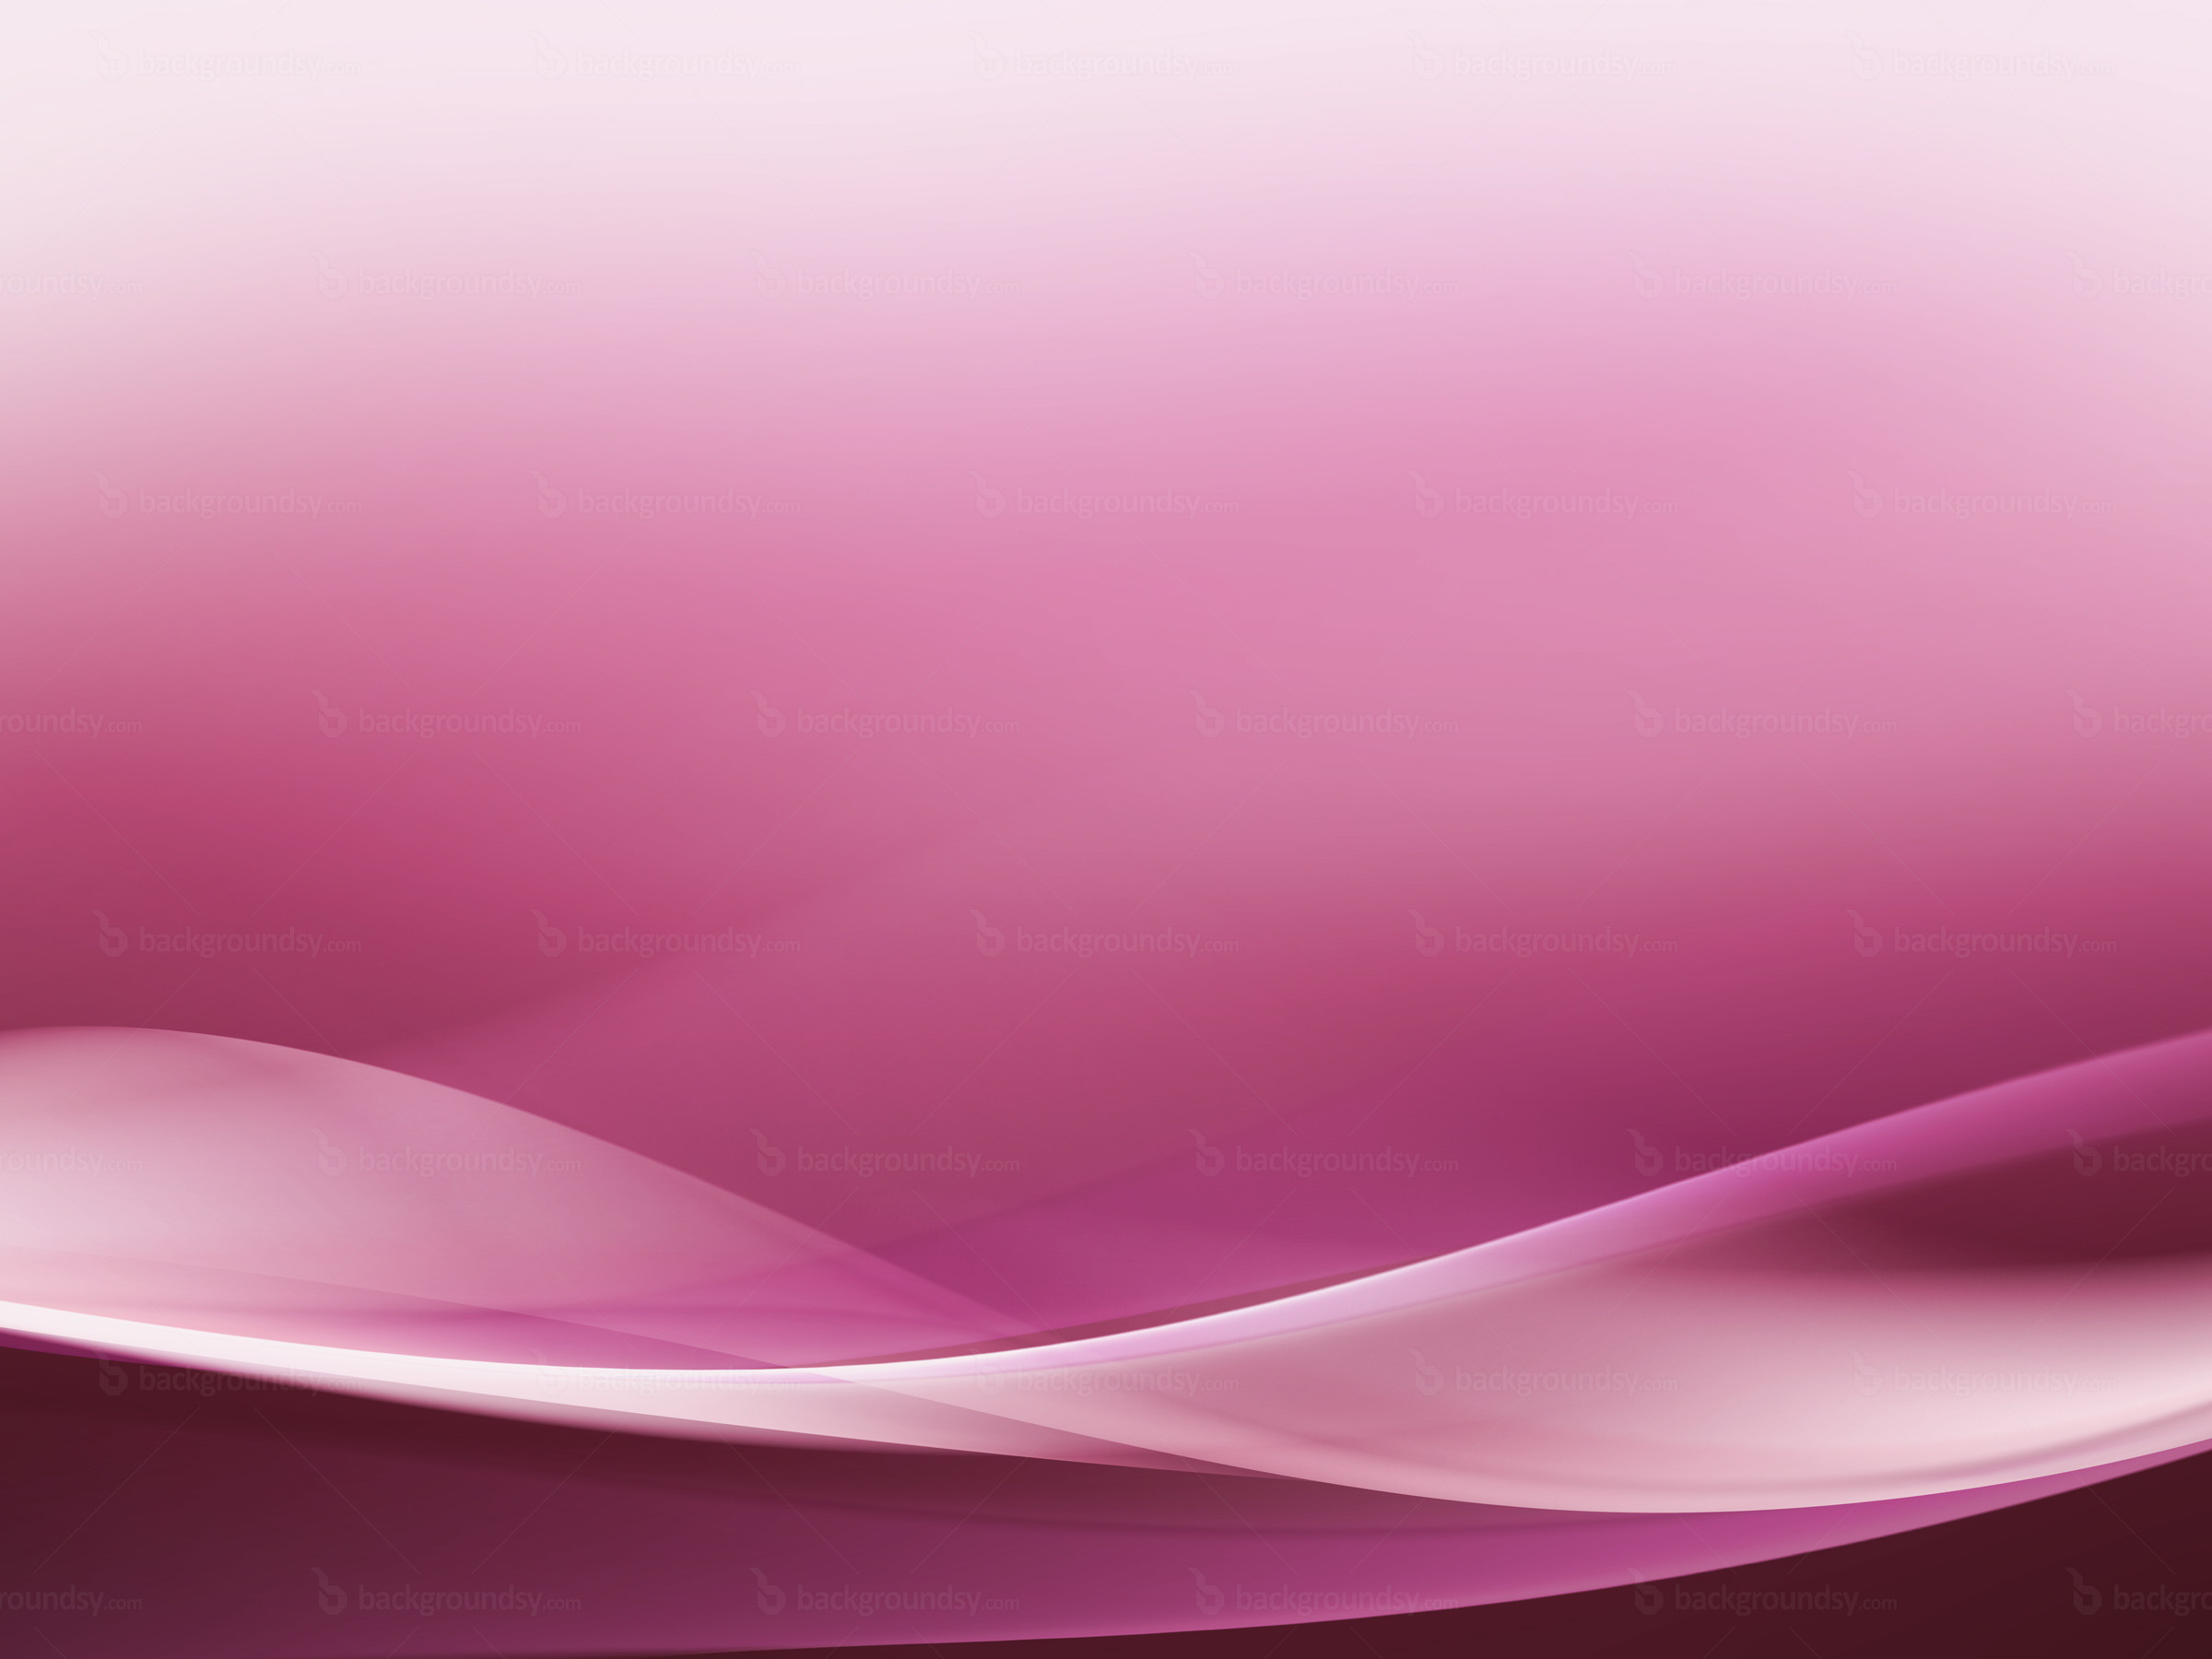 2400x1800 pink background download cool hd wallpapers here